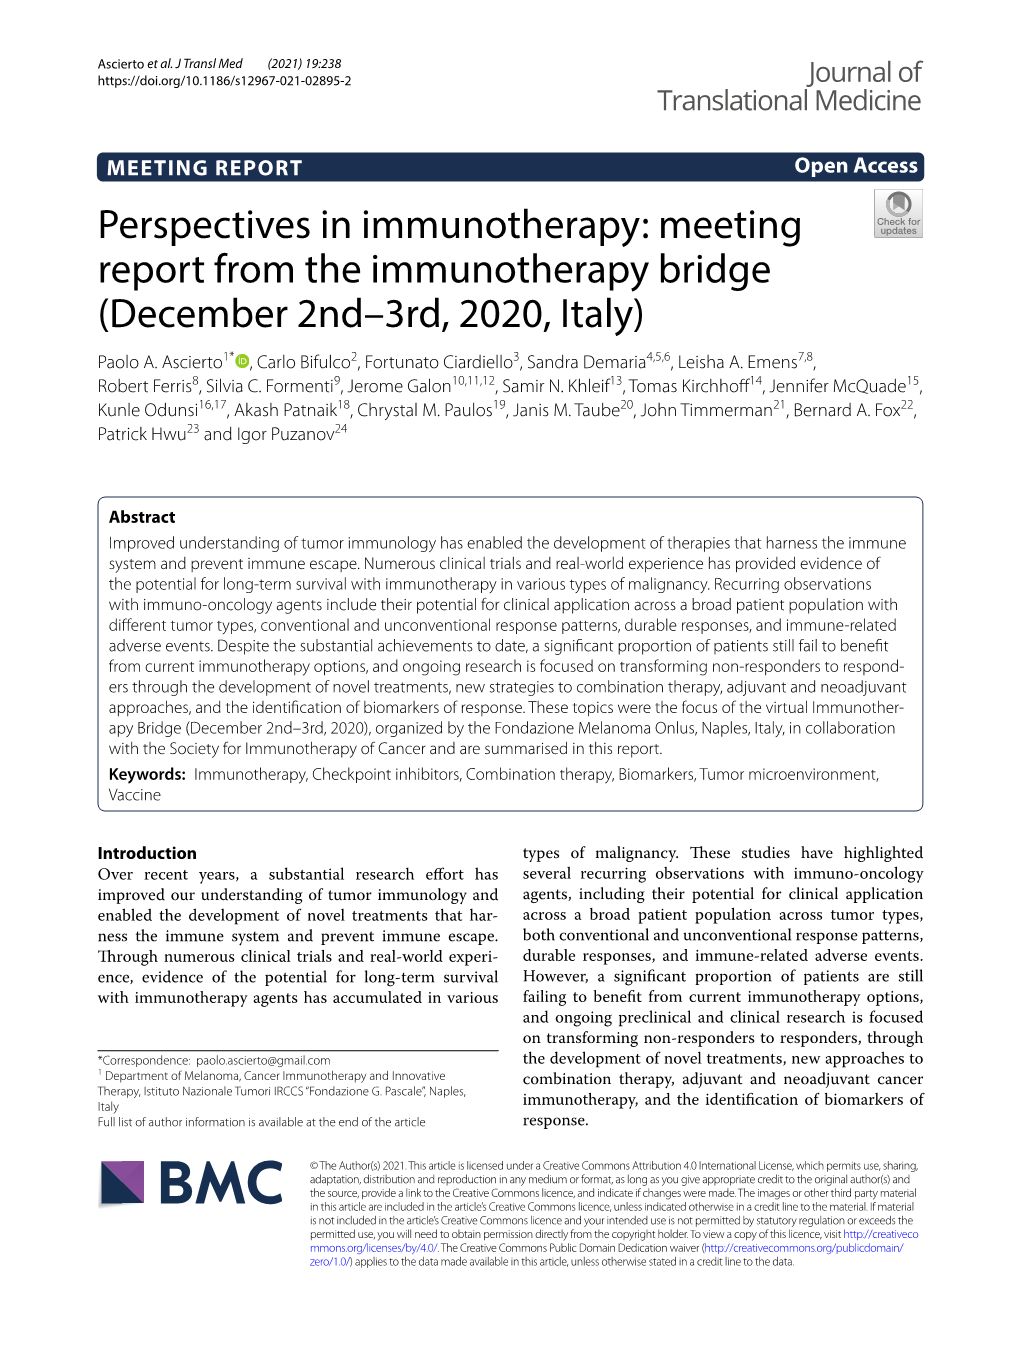 Perspectives in Immunotherapy: Meeting Report from the Immunotherapy Bridge (December 2Nd–3Rd, 2020, Italy) Paolo A